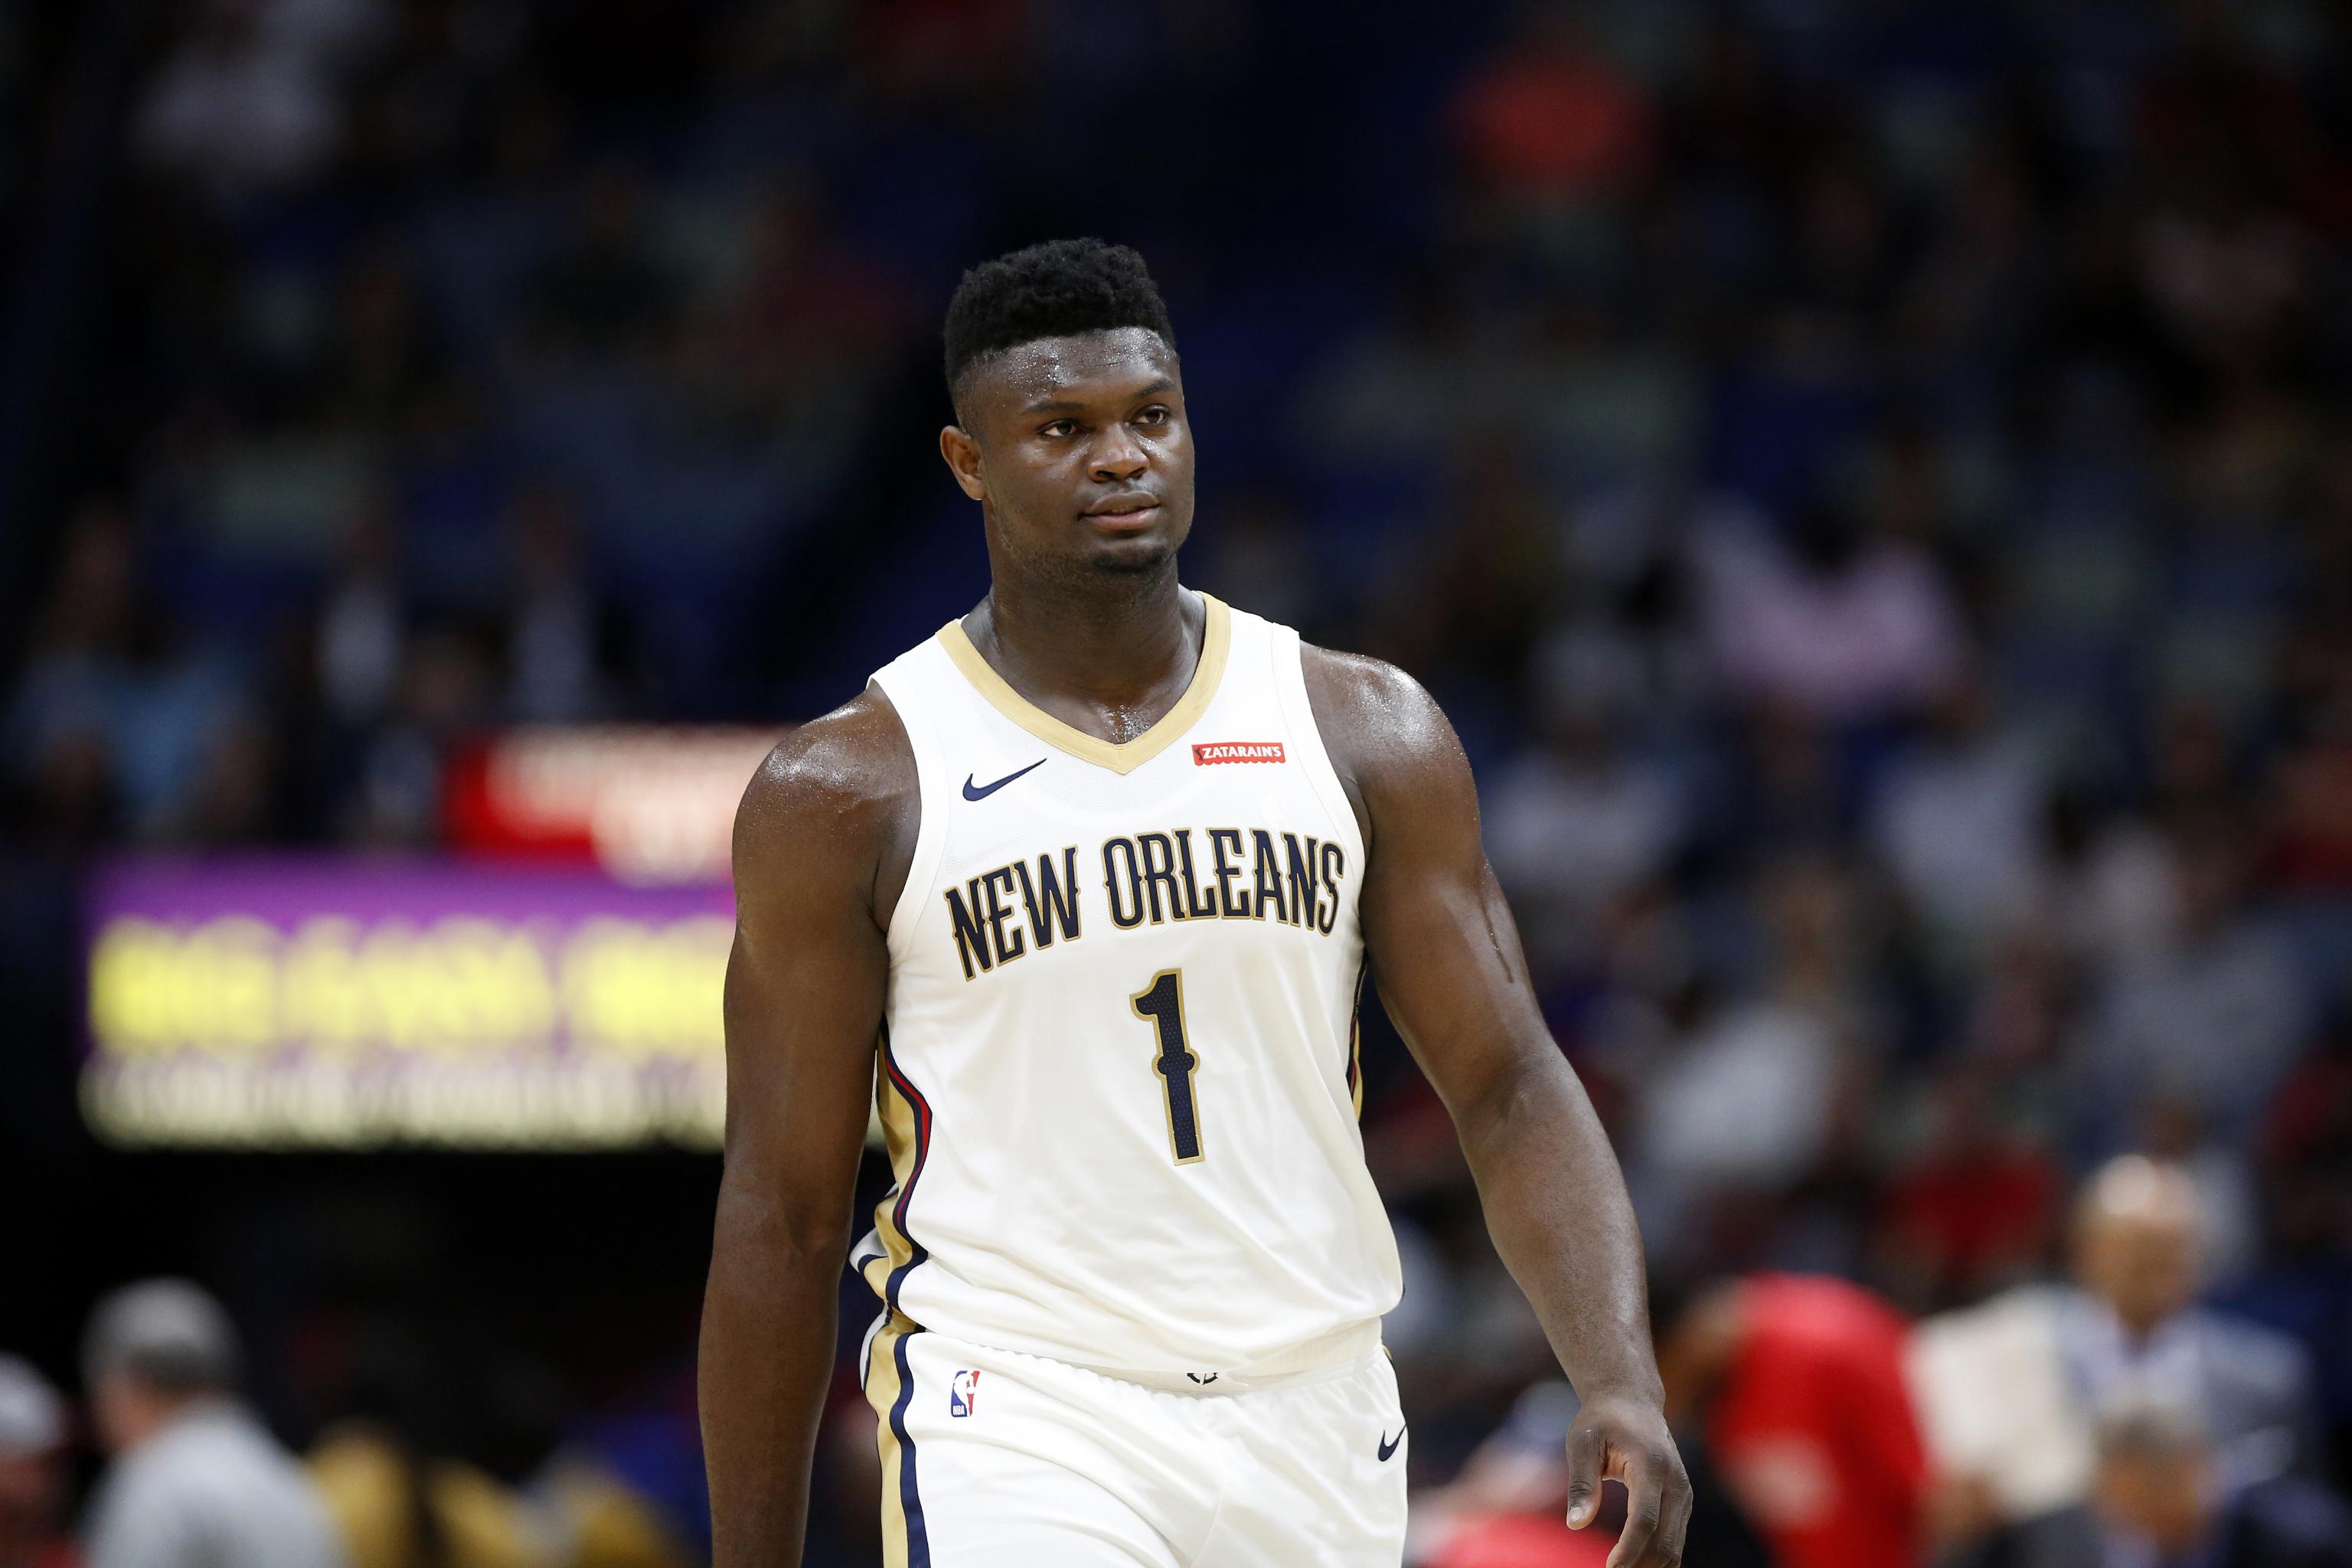 Zion Williamson underwent foot surgery for fracture, Pelicans say